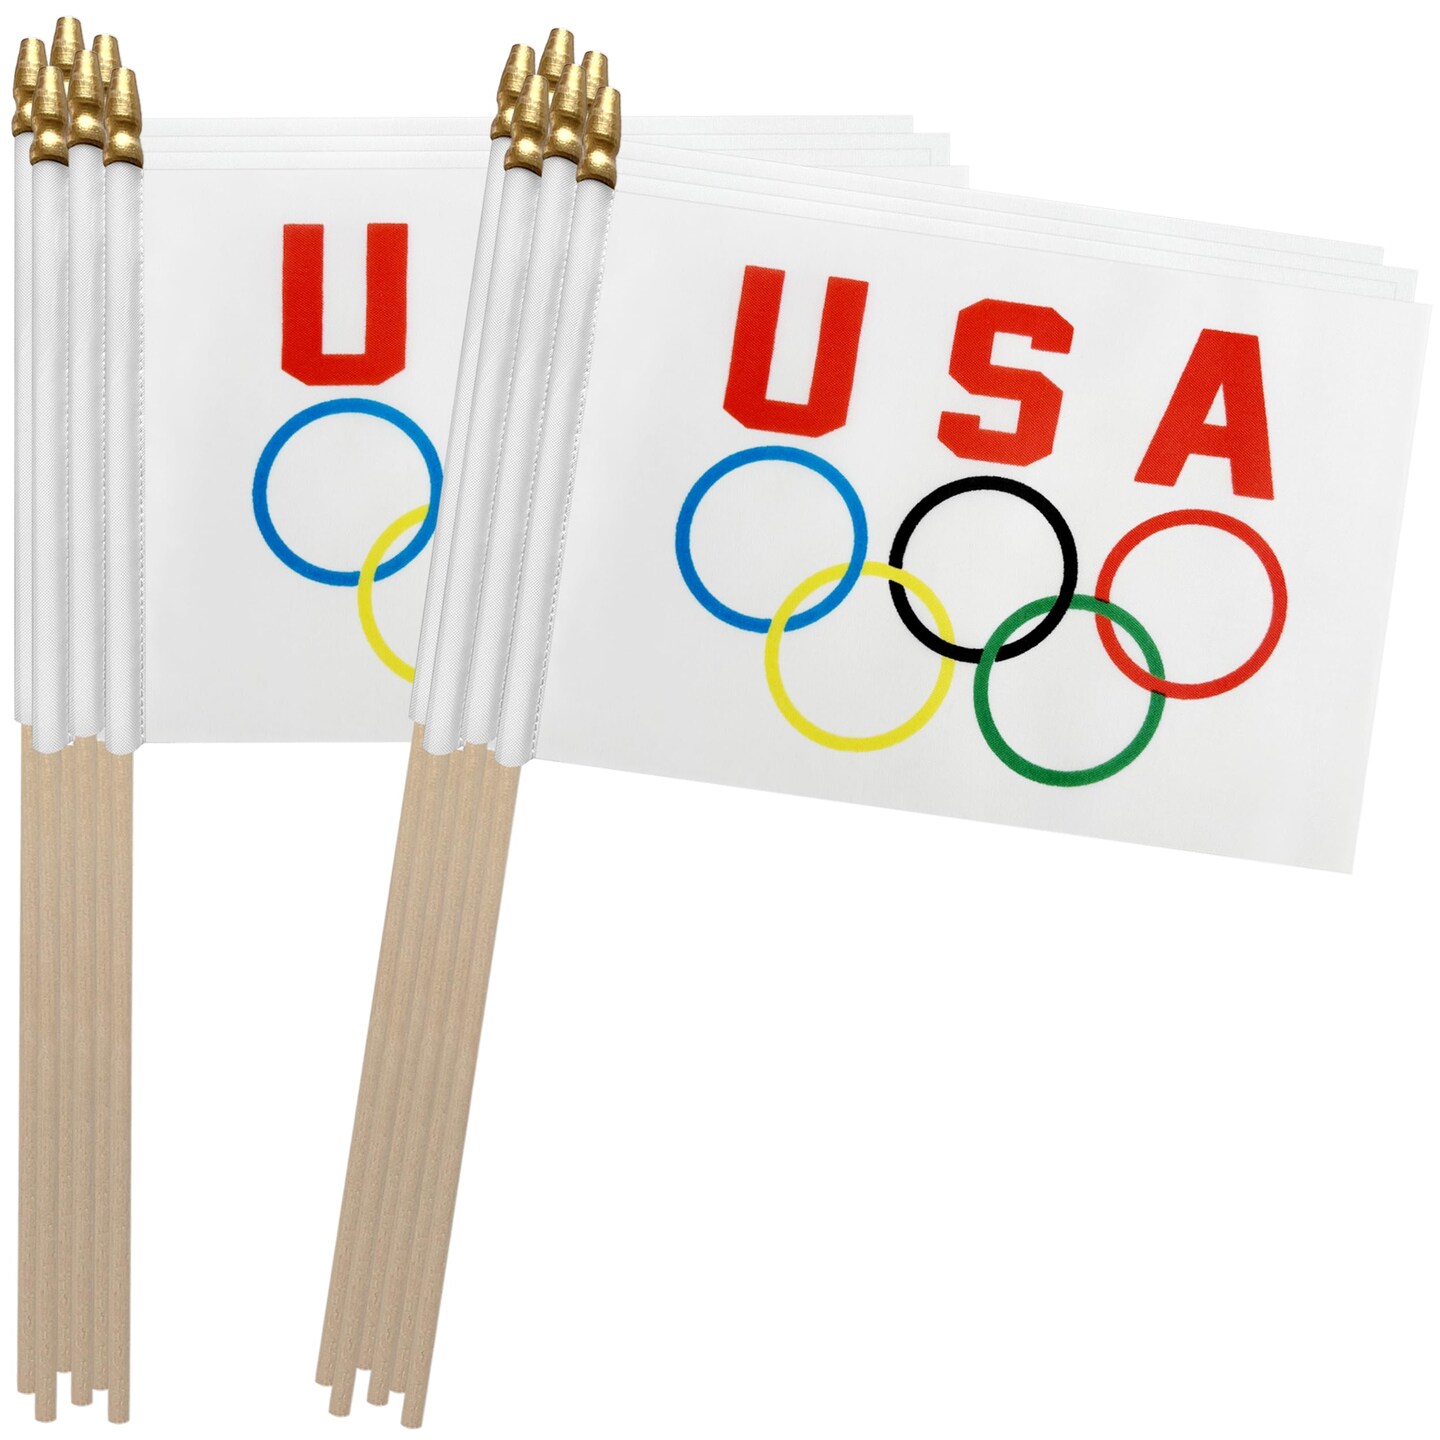 TSMD USA Olympic Games Stick Flag Olympic Rings Small Mini Hand Held Flags Decorations,5x8 Inch,12 Pack